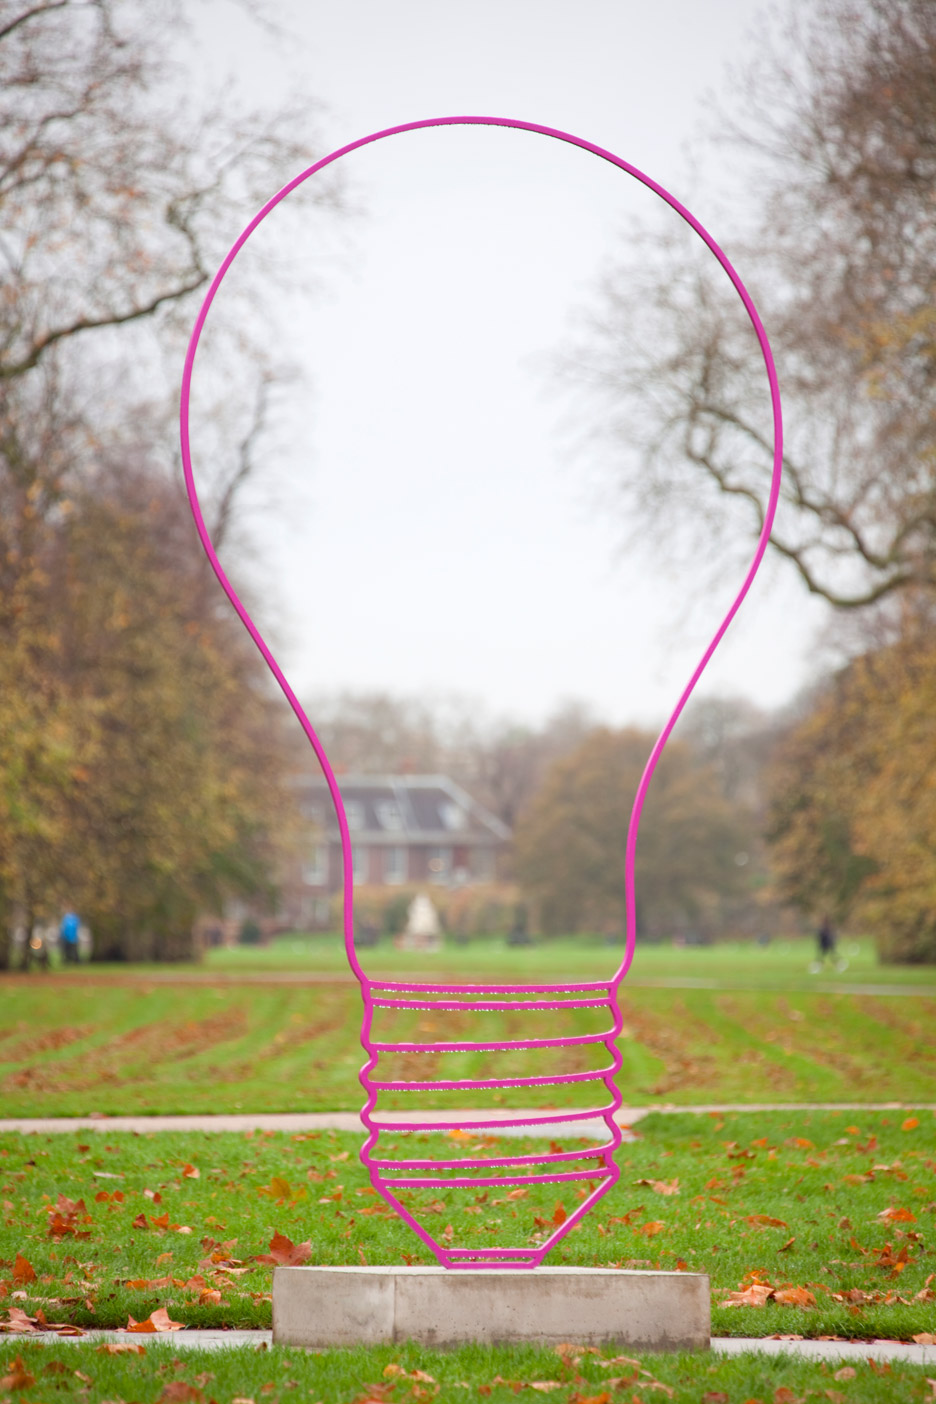 Transience by Michael Craig-Martin at the Serpentine Gallery